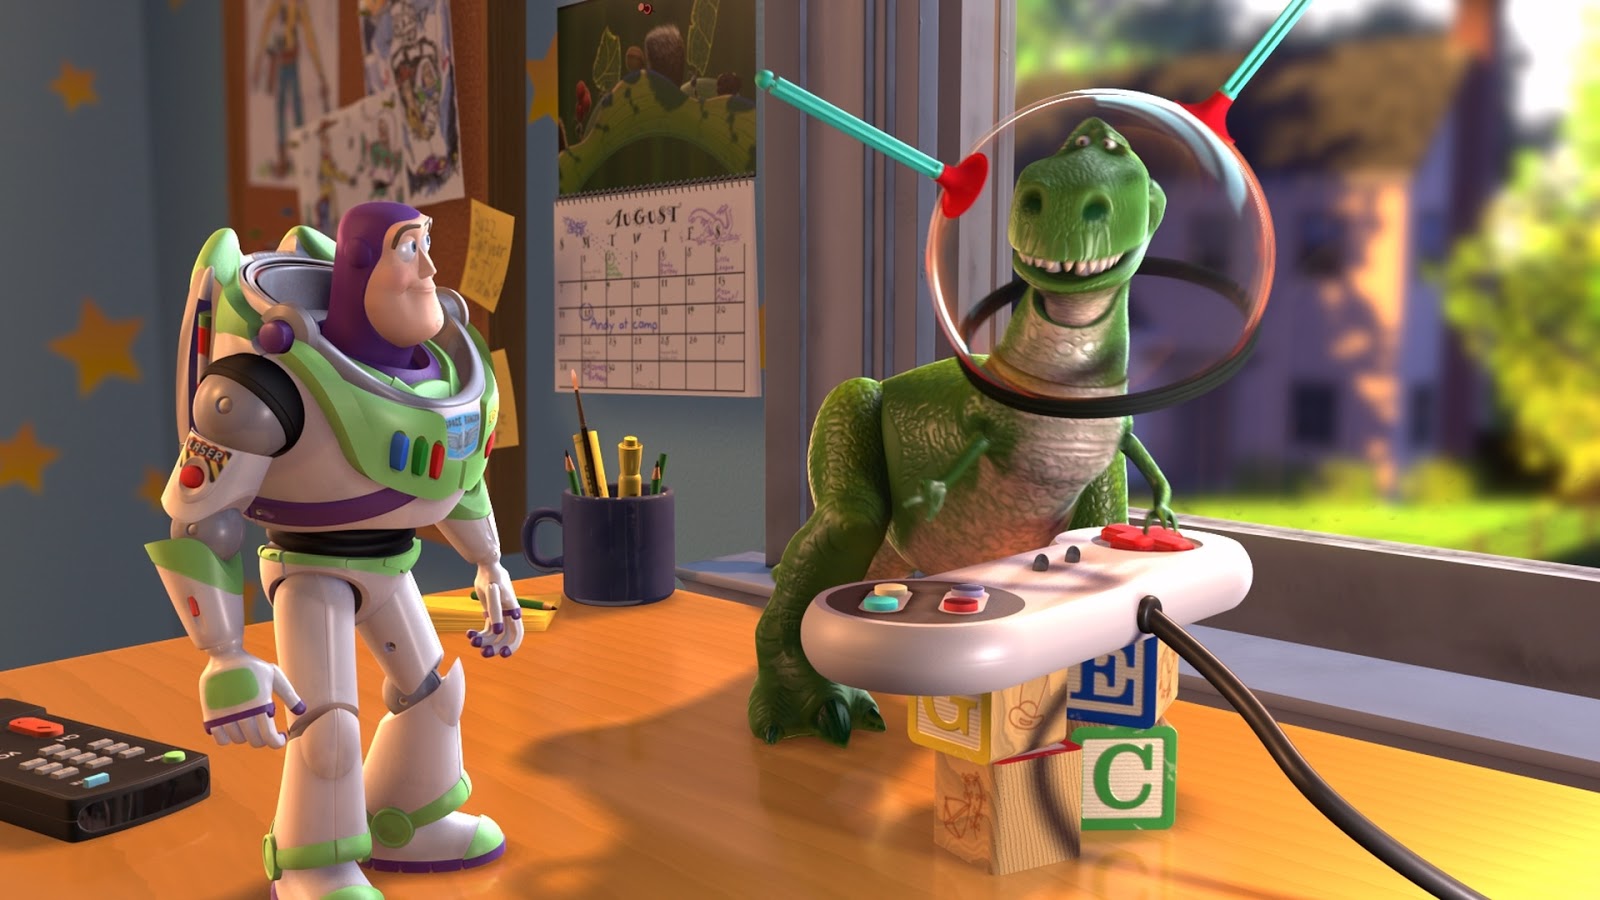 Movie Lovers Reviews: Toy Story 2 (1999) - The Toys Enlarge Their Horizons